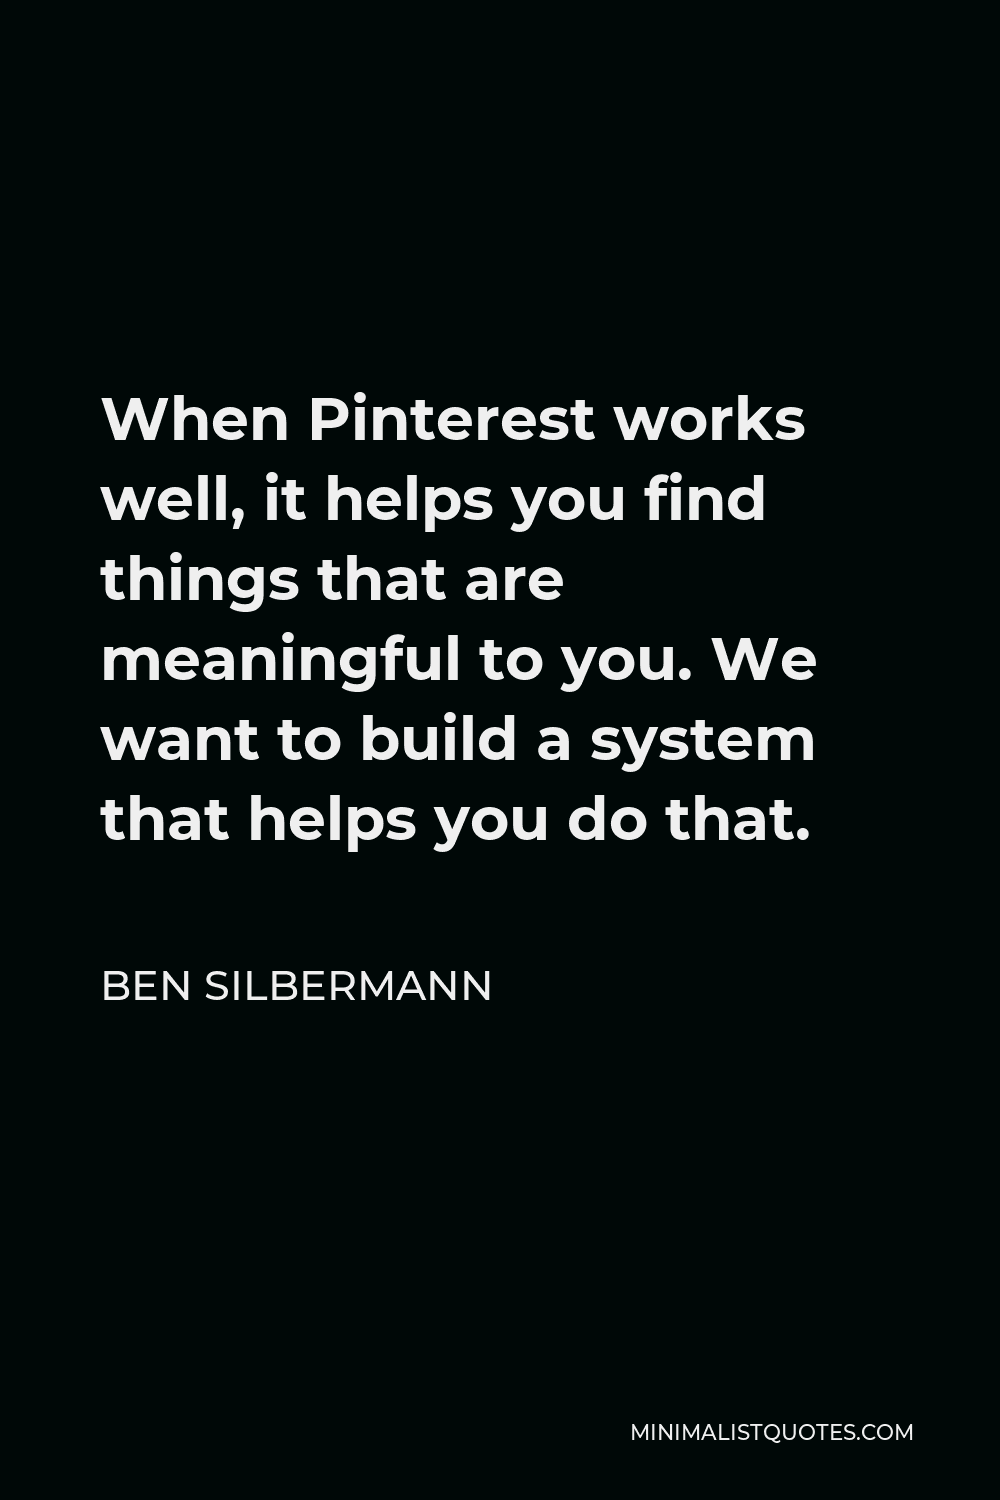 Ben Silbermann Quote - When Pinterest works well, it helps you find things that are meaningful to you. We want to build a system that helps you do that.